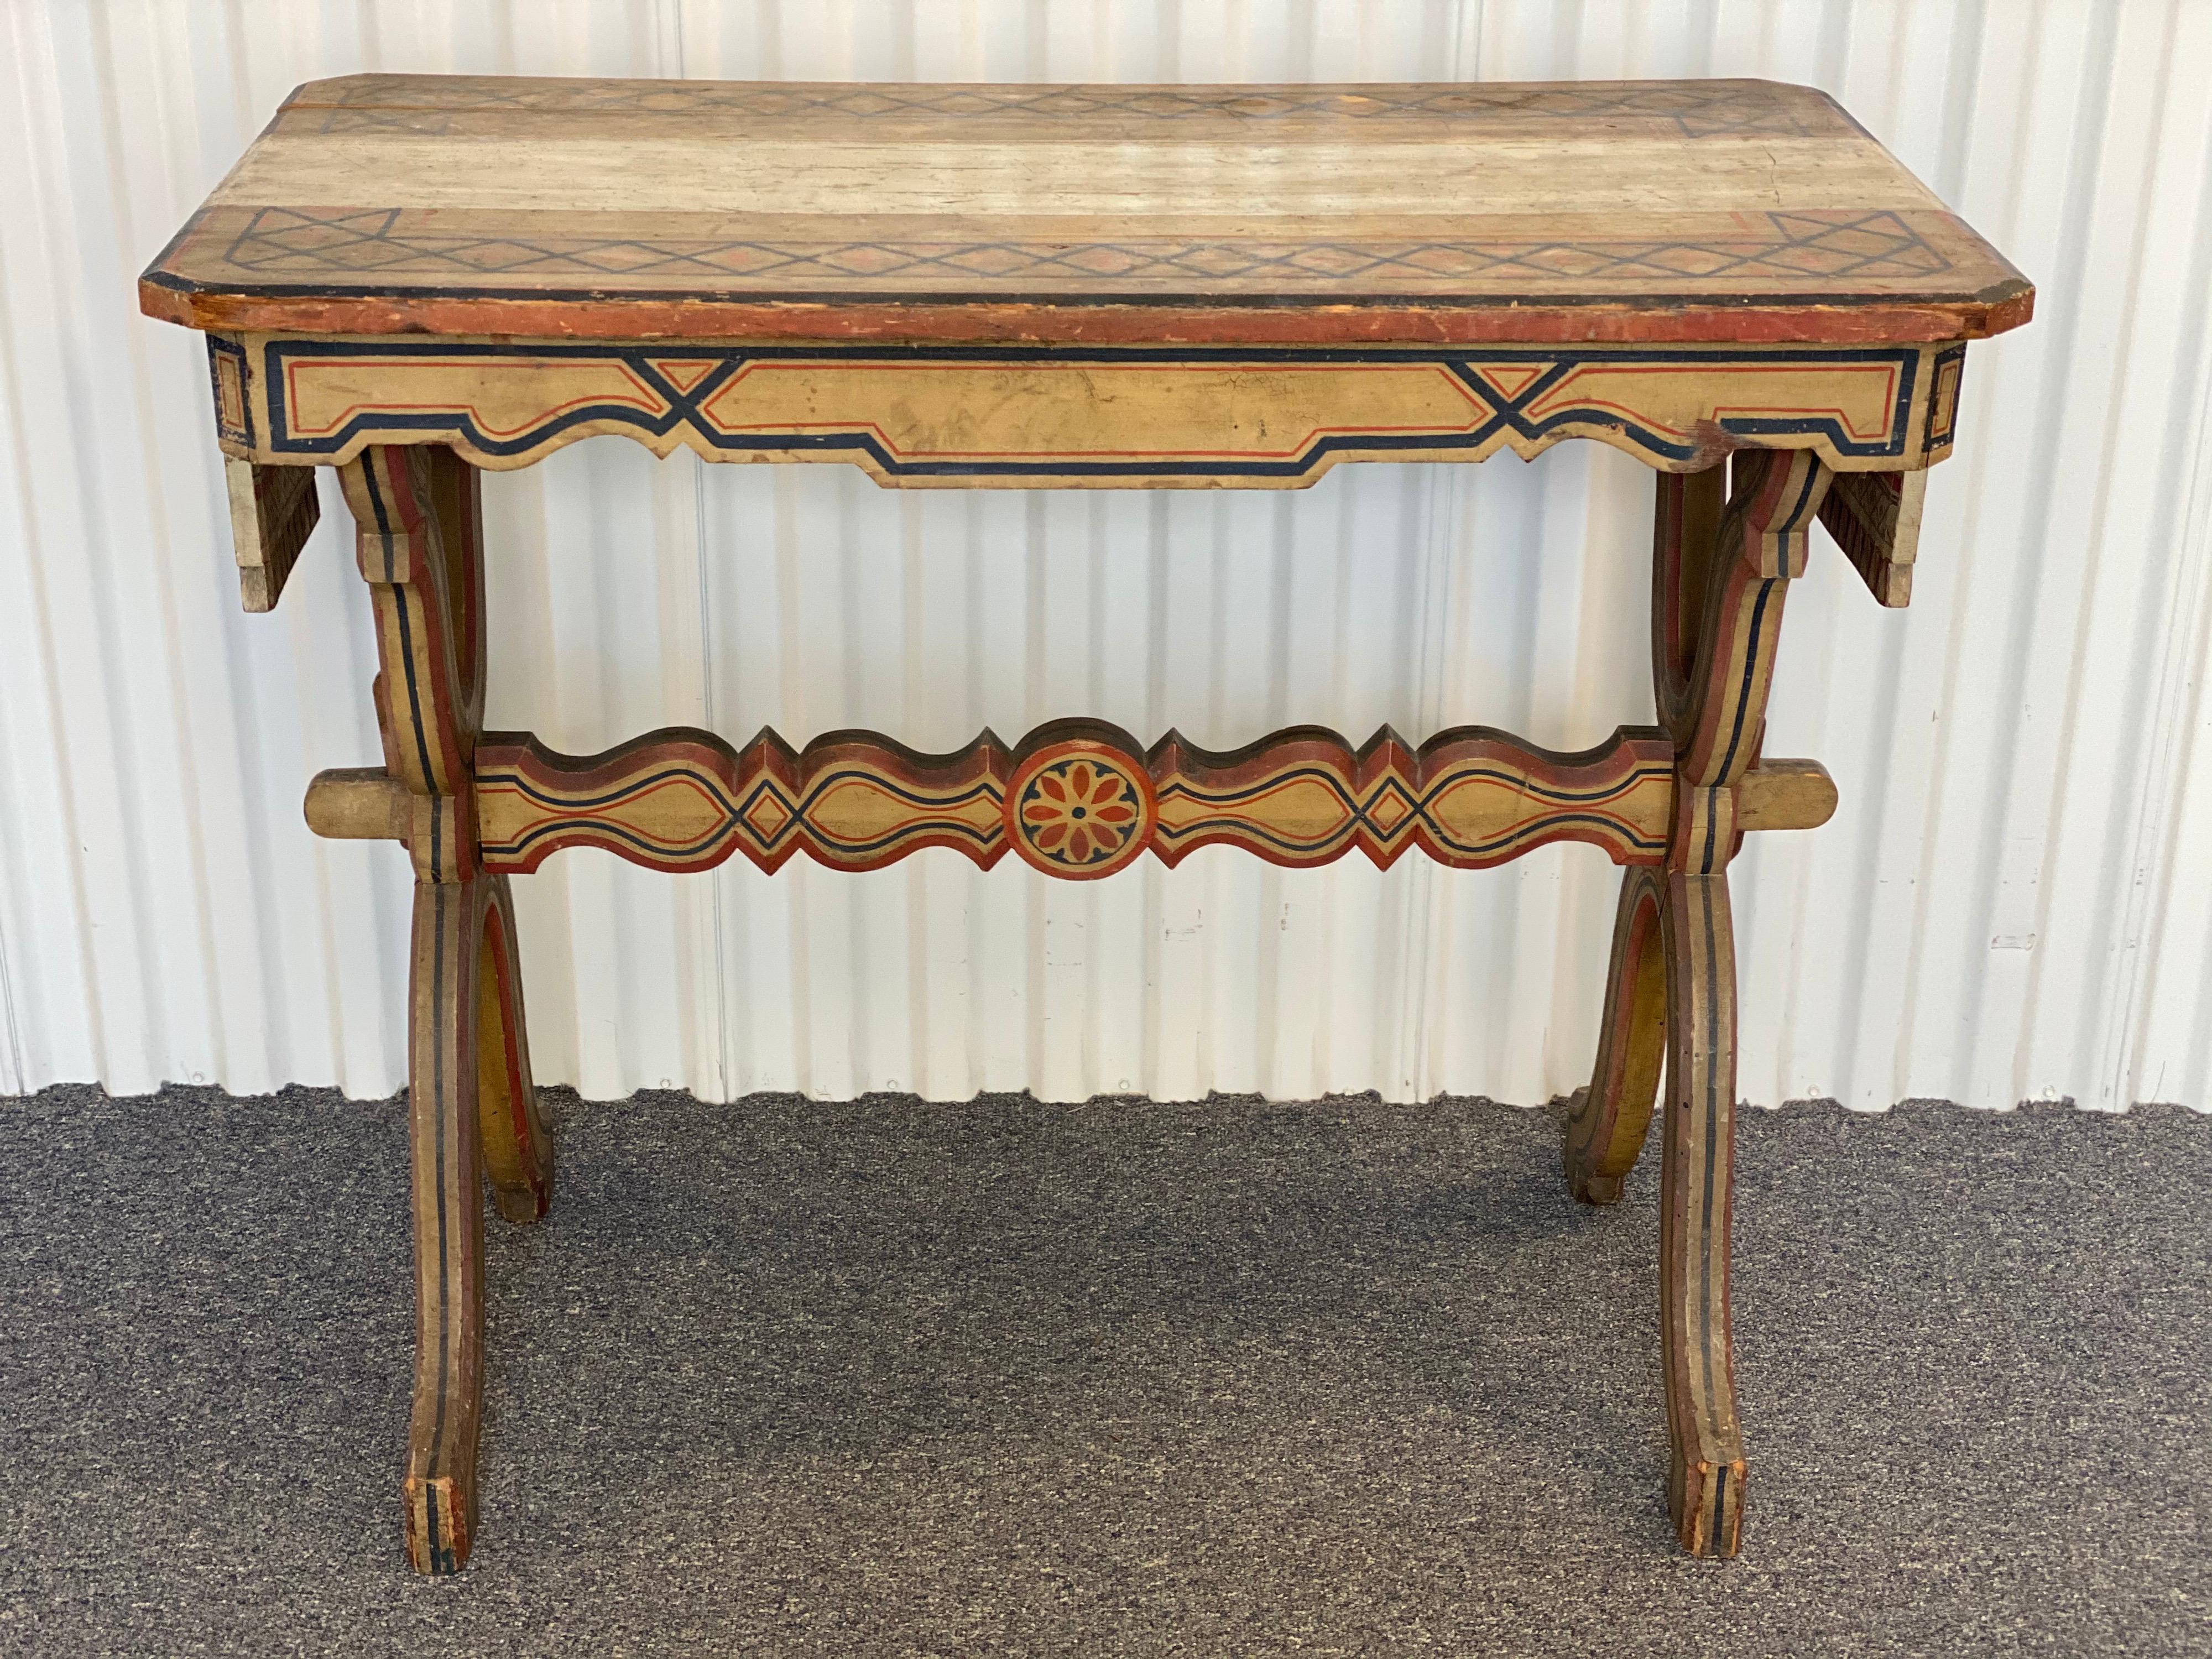 Late 19th century Swedish painted console table.
Elaborately hand painted console in navy, vermillion, and a faded yellow-cream palette. This unique piece has a runner that has been hand carved into the table itself and cascades beautifully off the